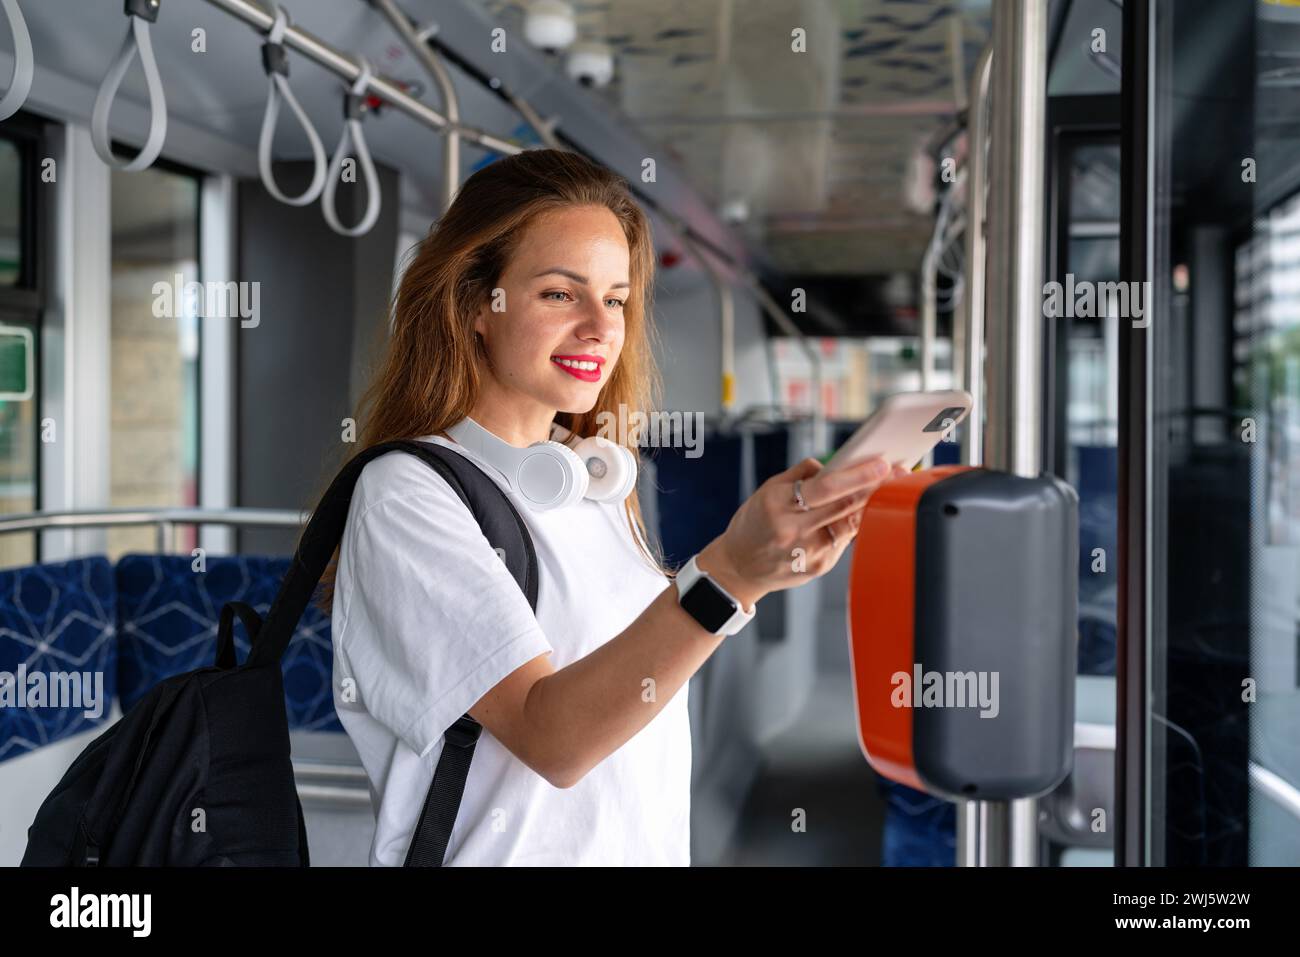 Woman paying bus with her smartphone and contactless technology for mobile payment. Stock Photo